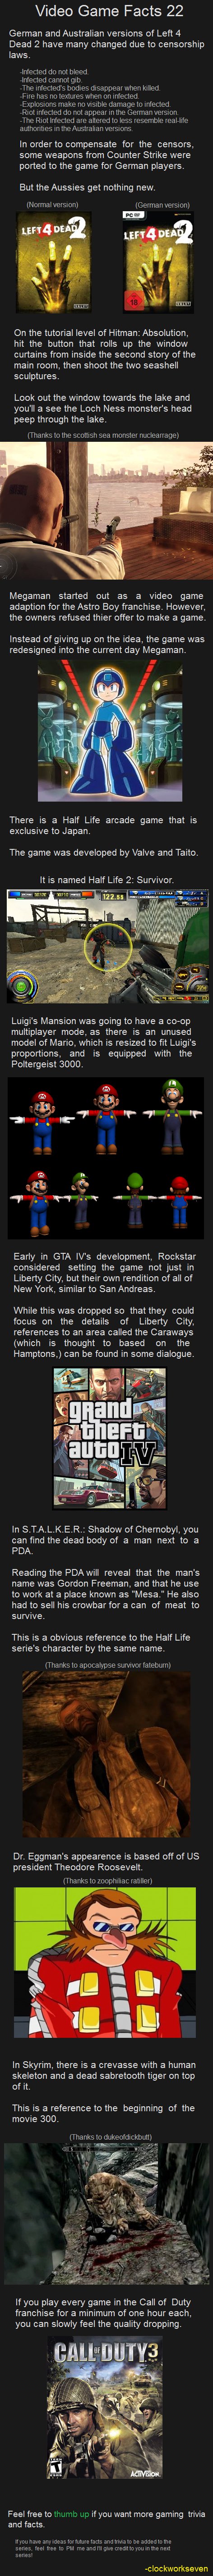 Video Game Facts #22